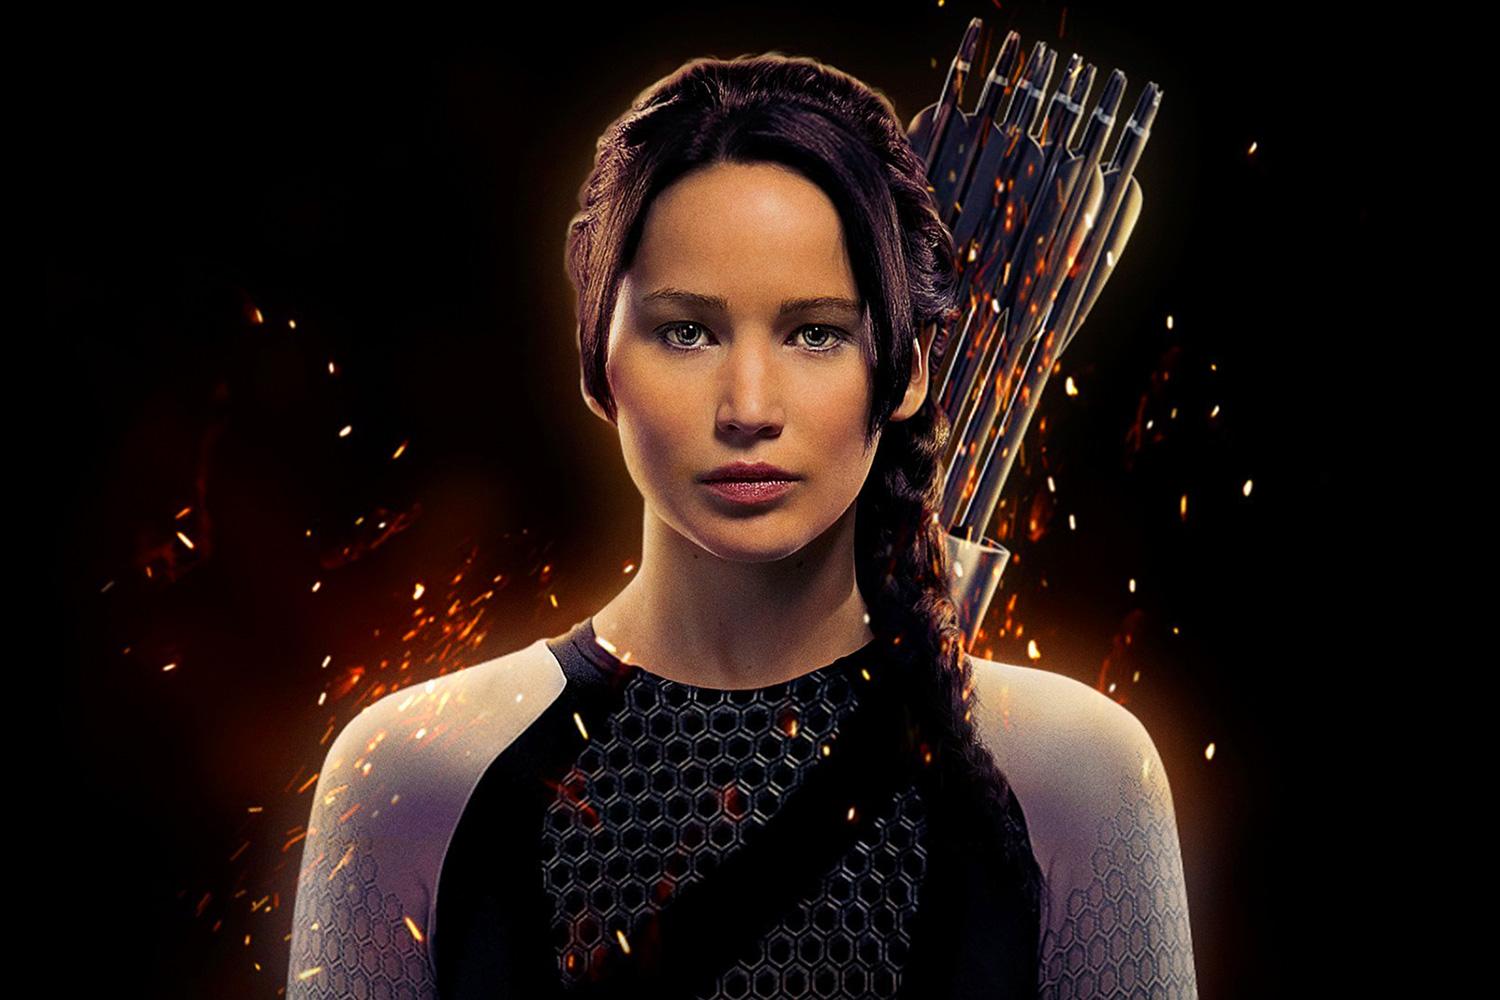 The Hunger Games: Catching Fire - Where to Watch and Stream Online –